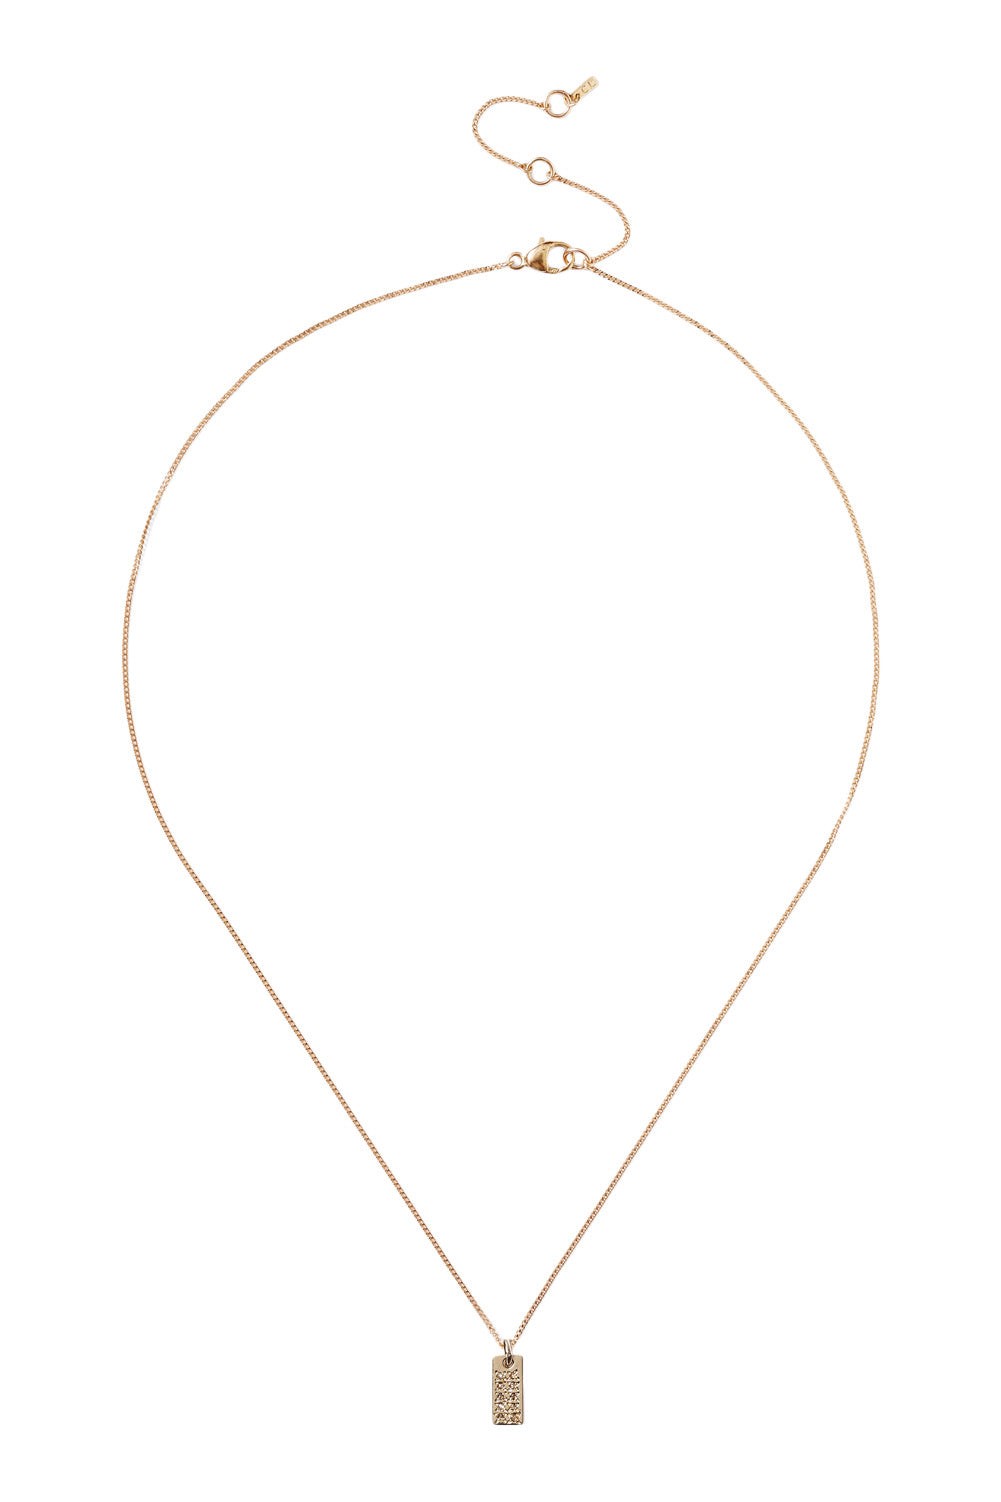 Chan Luu Domino Necklace in Yellow Gold